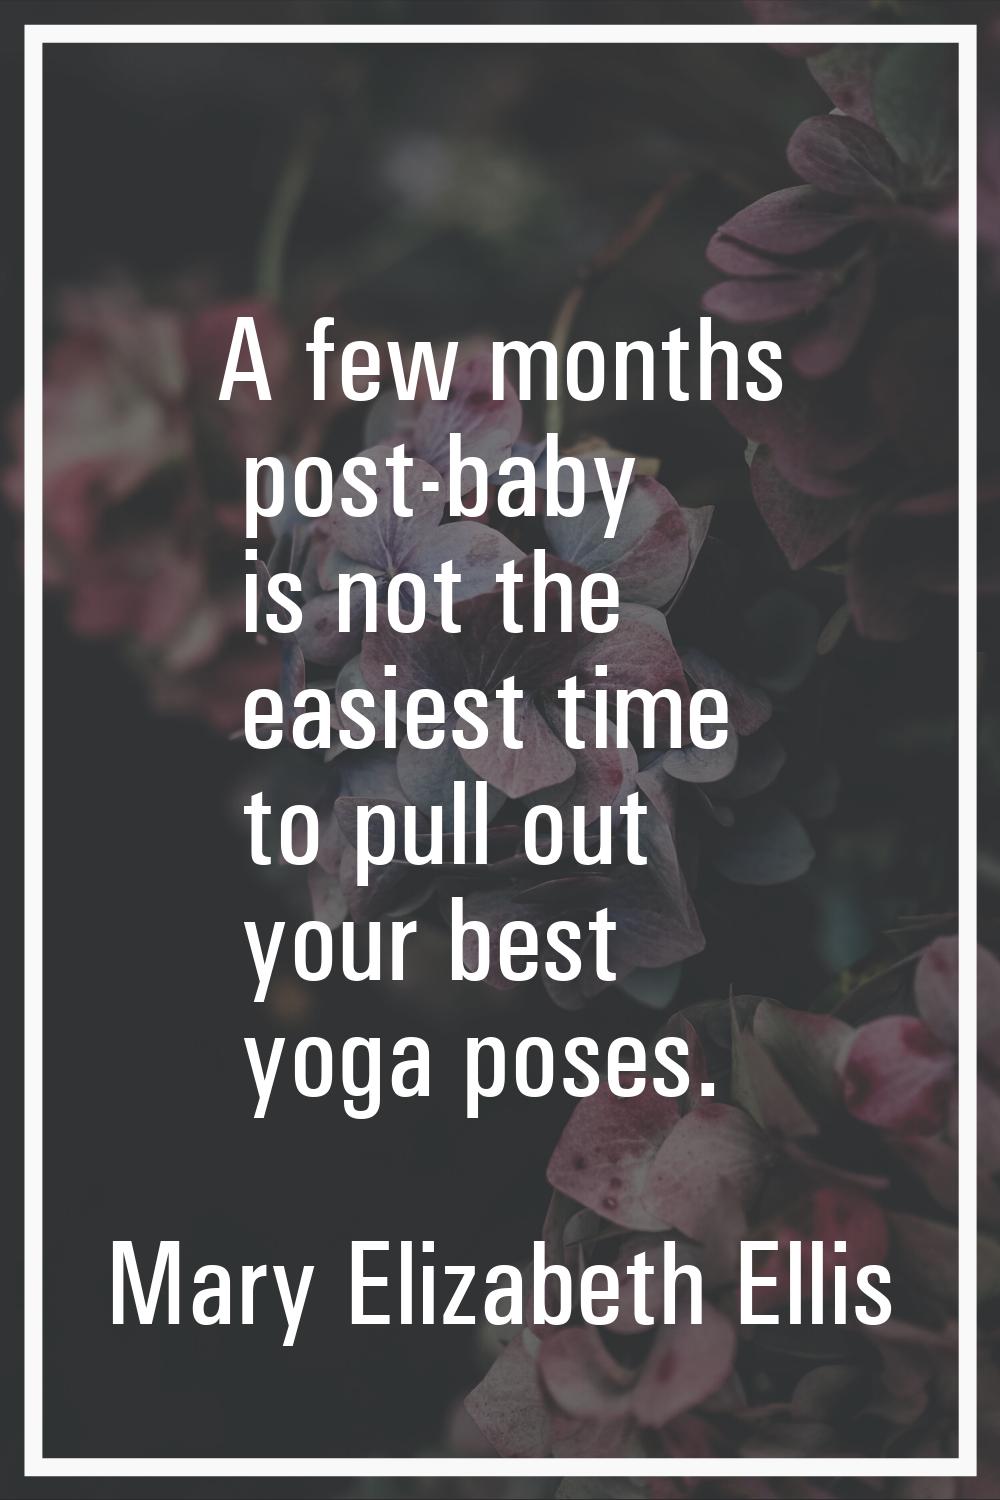 A few months post-baby is not the easiest time to pull out your best yoga poses.